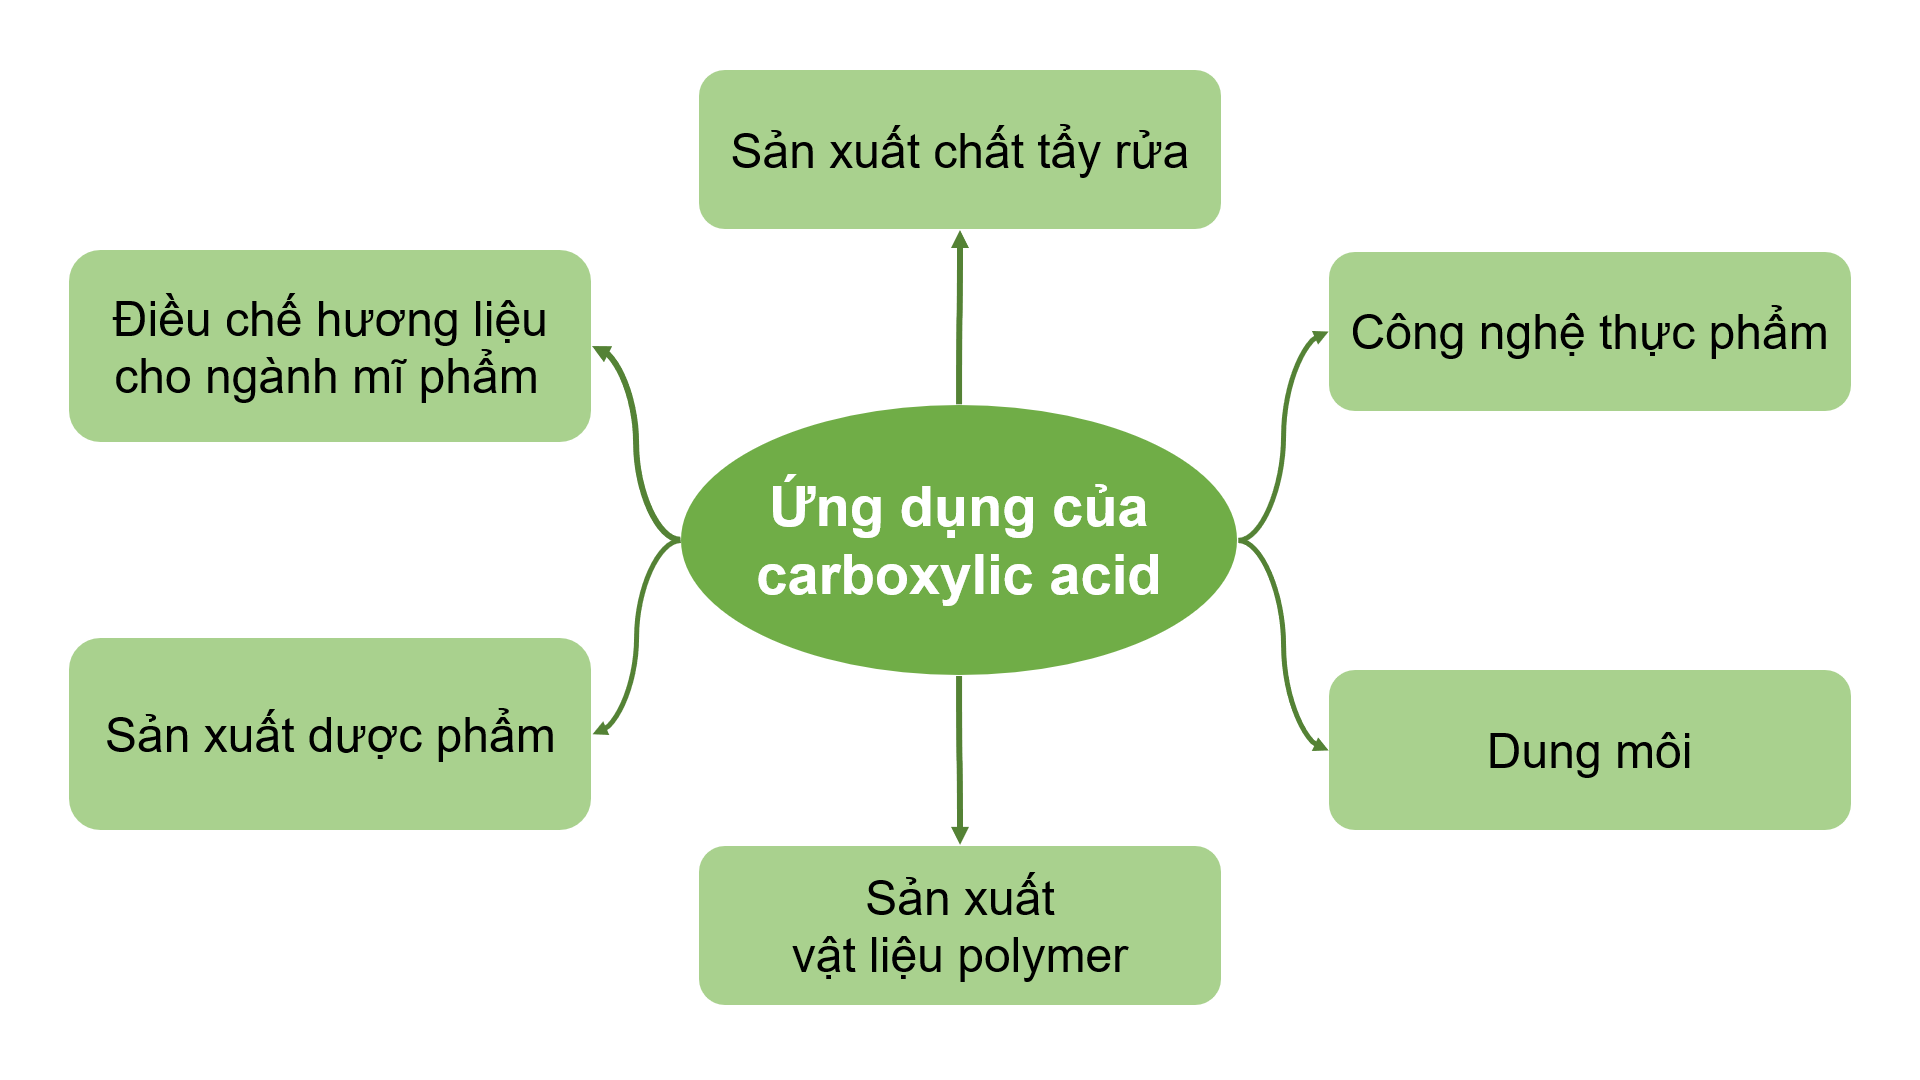 Ứng dụng của carboxylic acid olm.